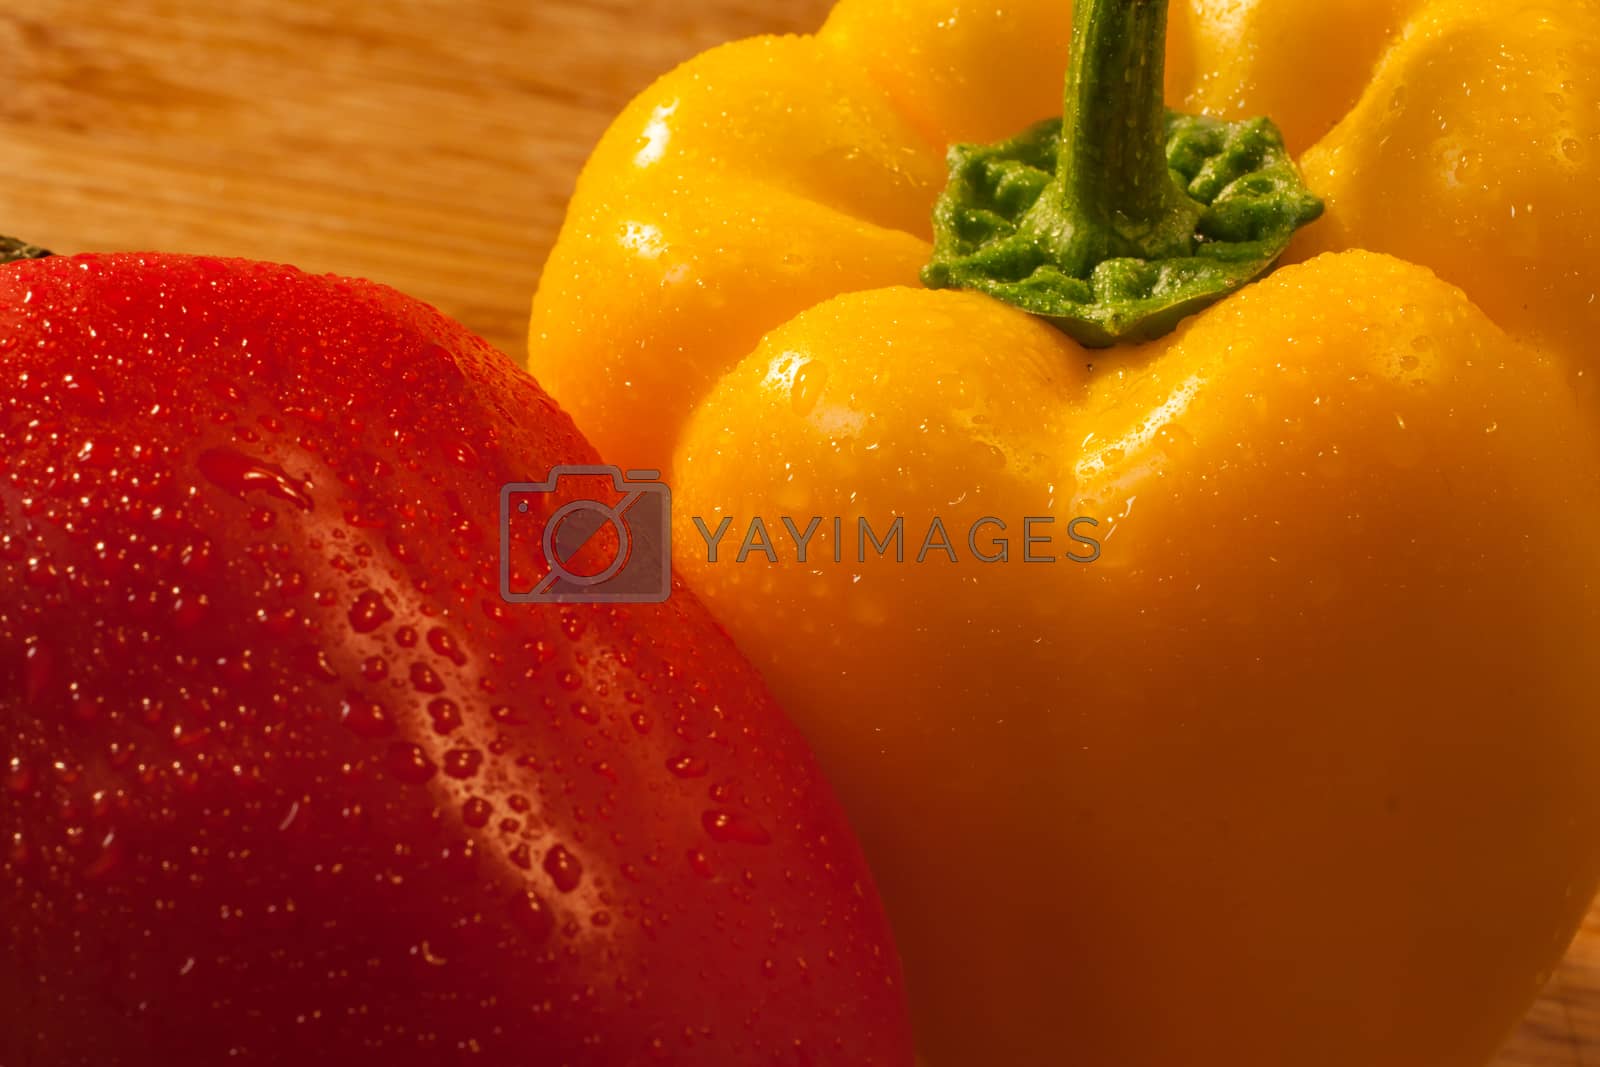 Royalty free image of Bell Peppers by TravisPhotoWorks